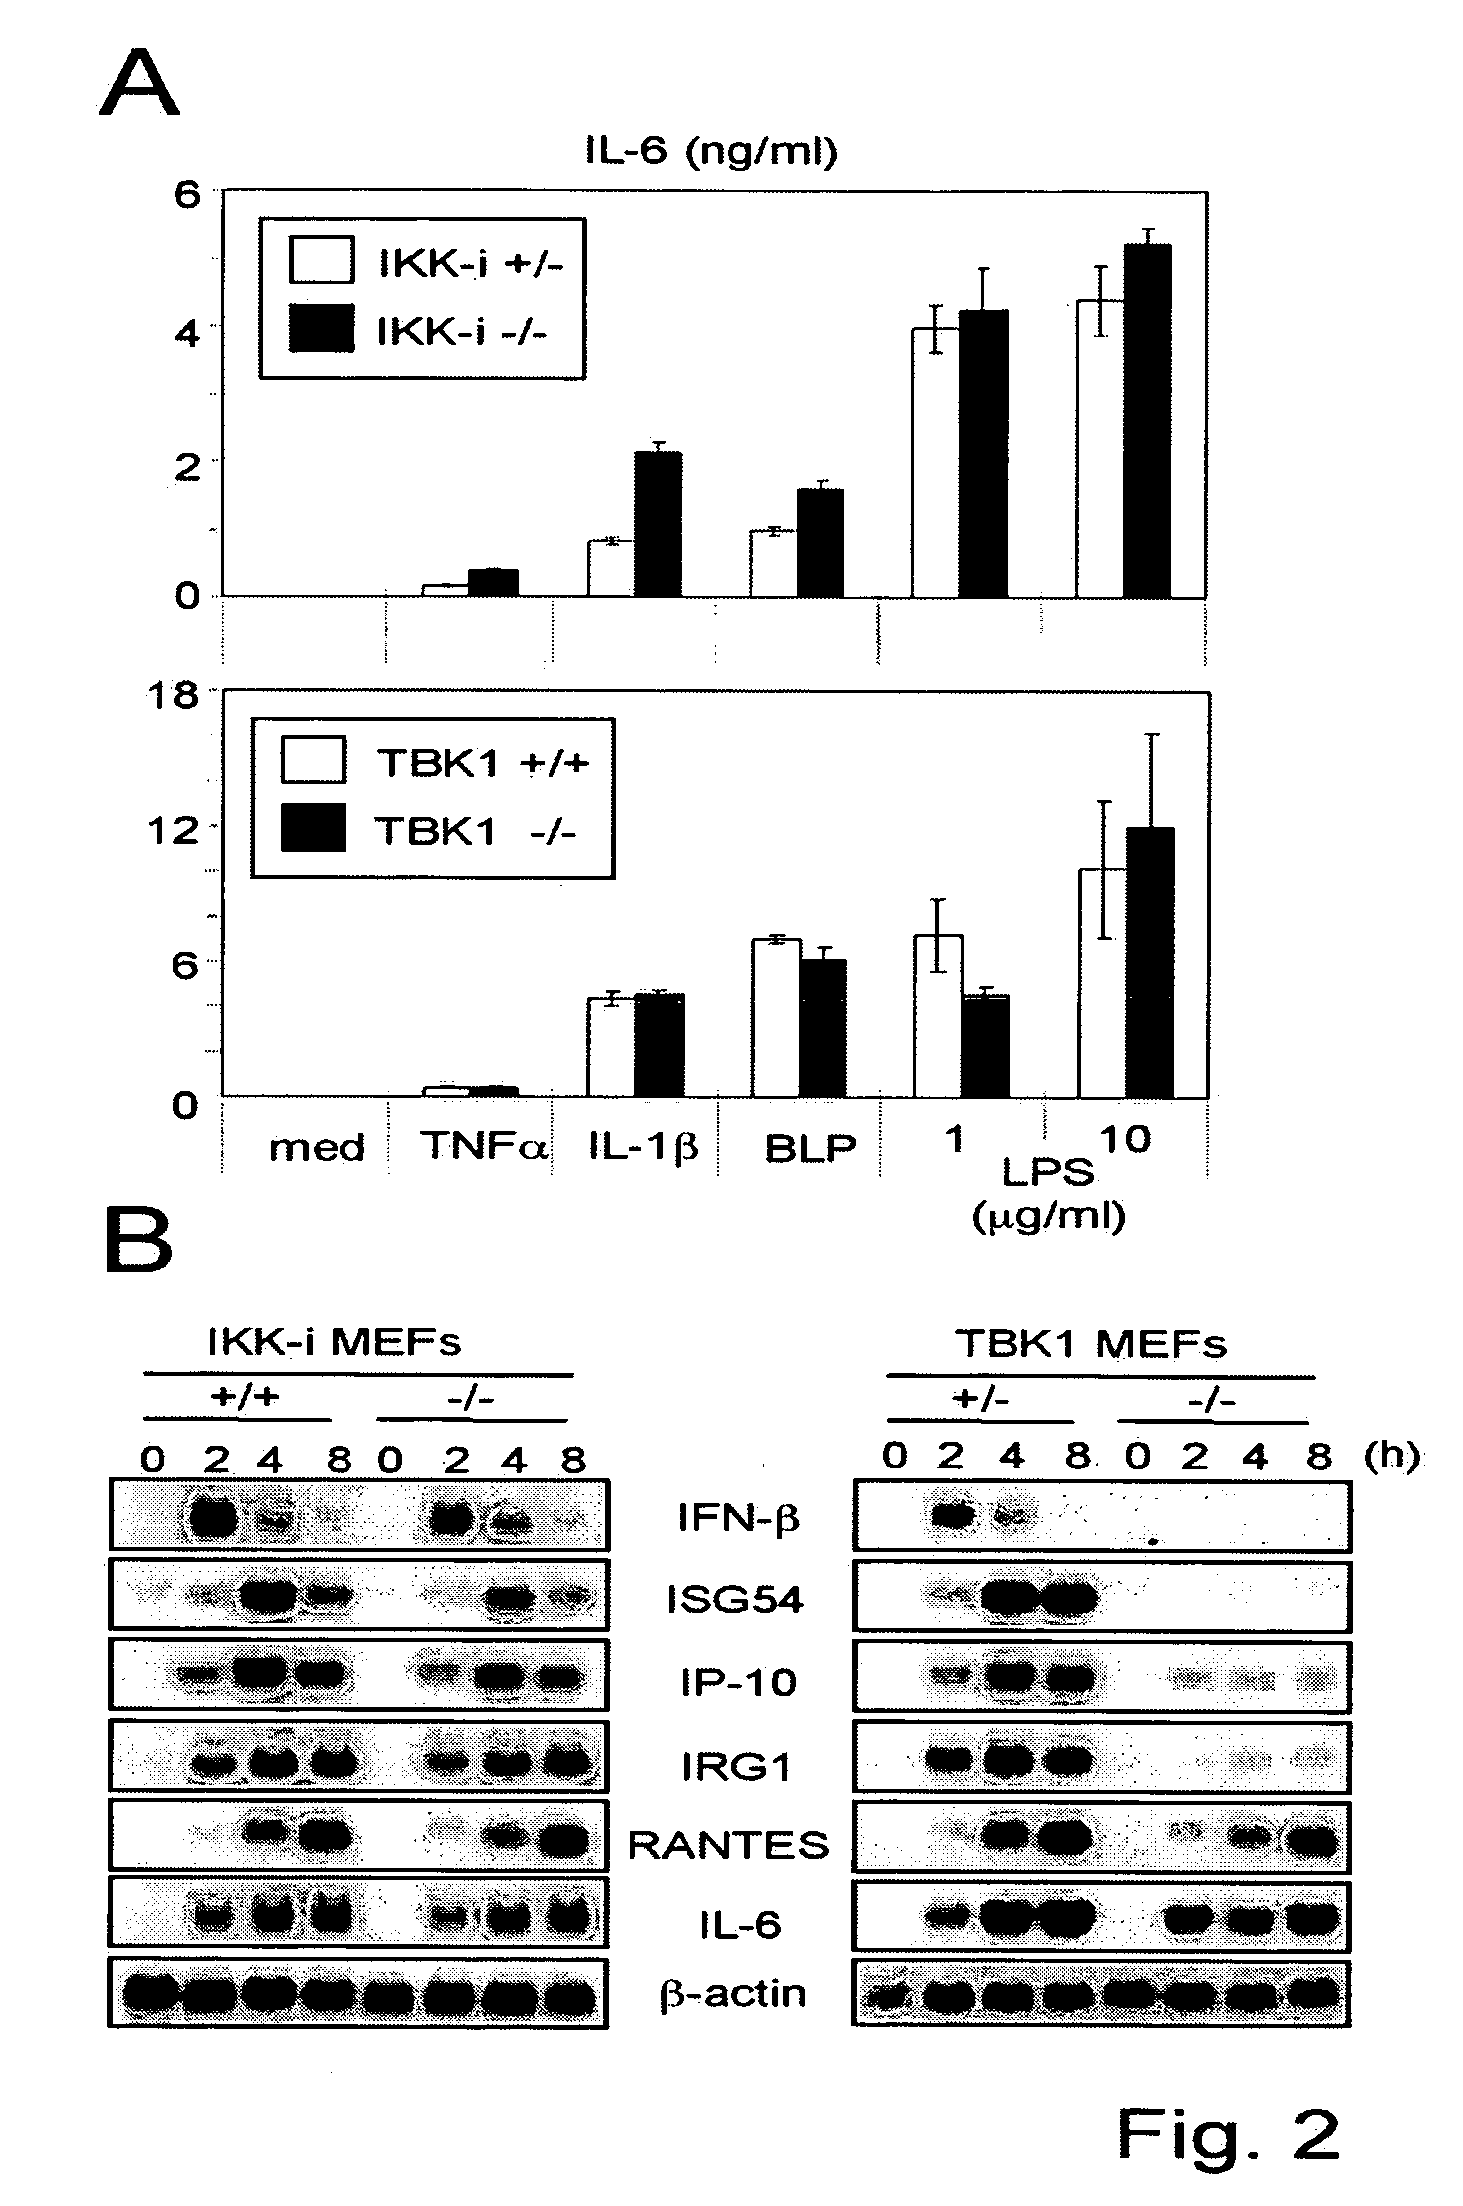 Screening method with the use of TBK1 knockout mouse